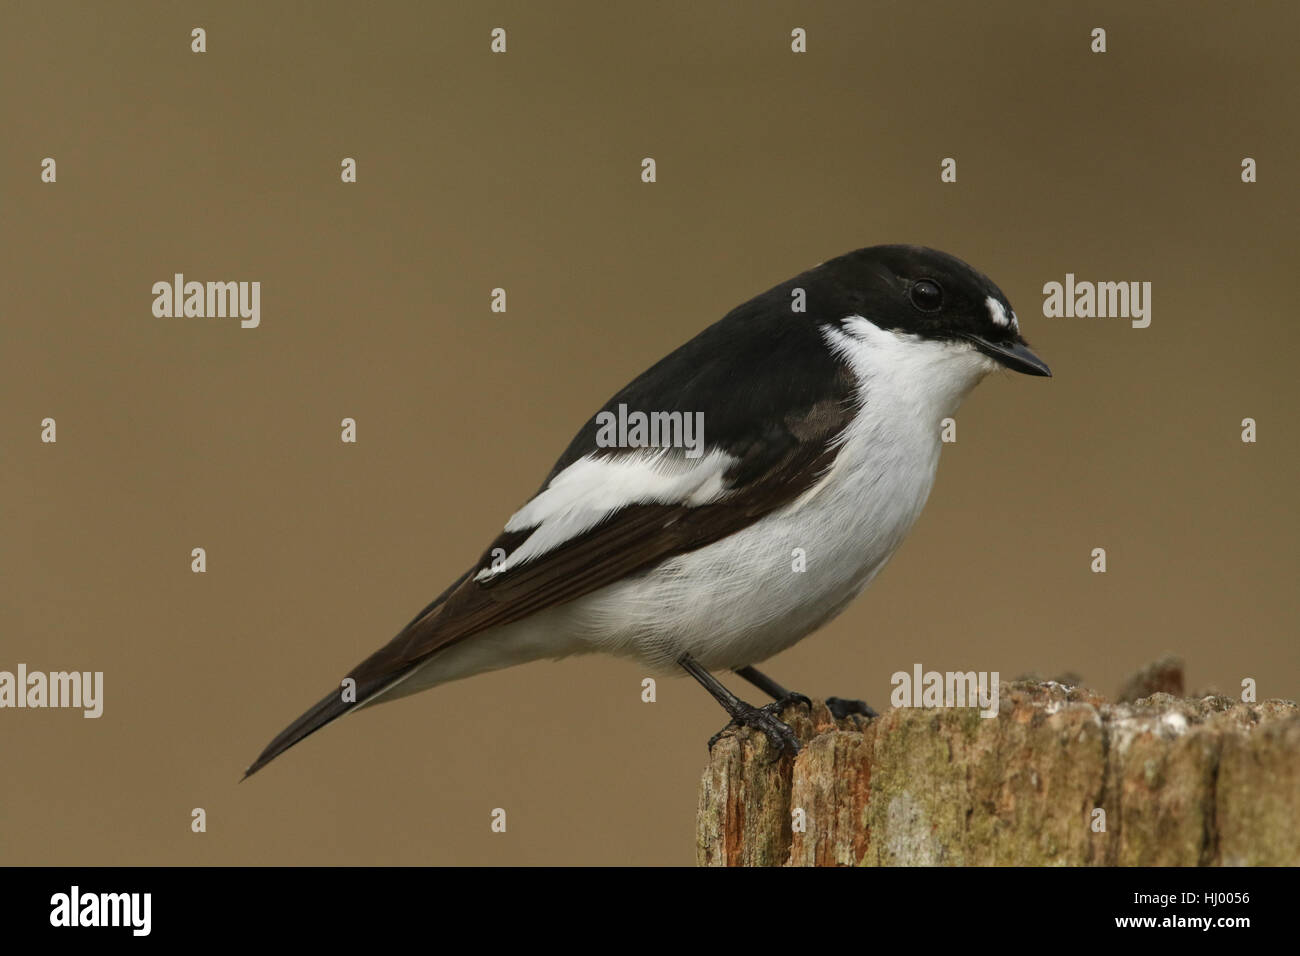 A rare male Pied Flycatchers (Ficedula hypoleuca) perched on a wooden post. Stock Photo